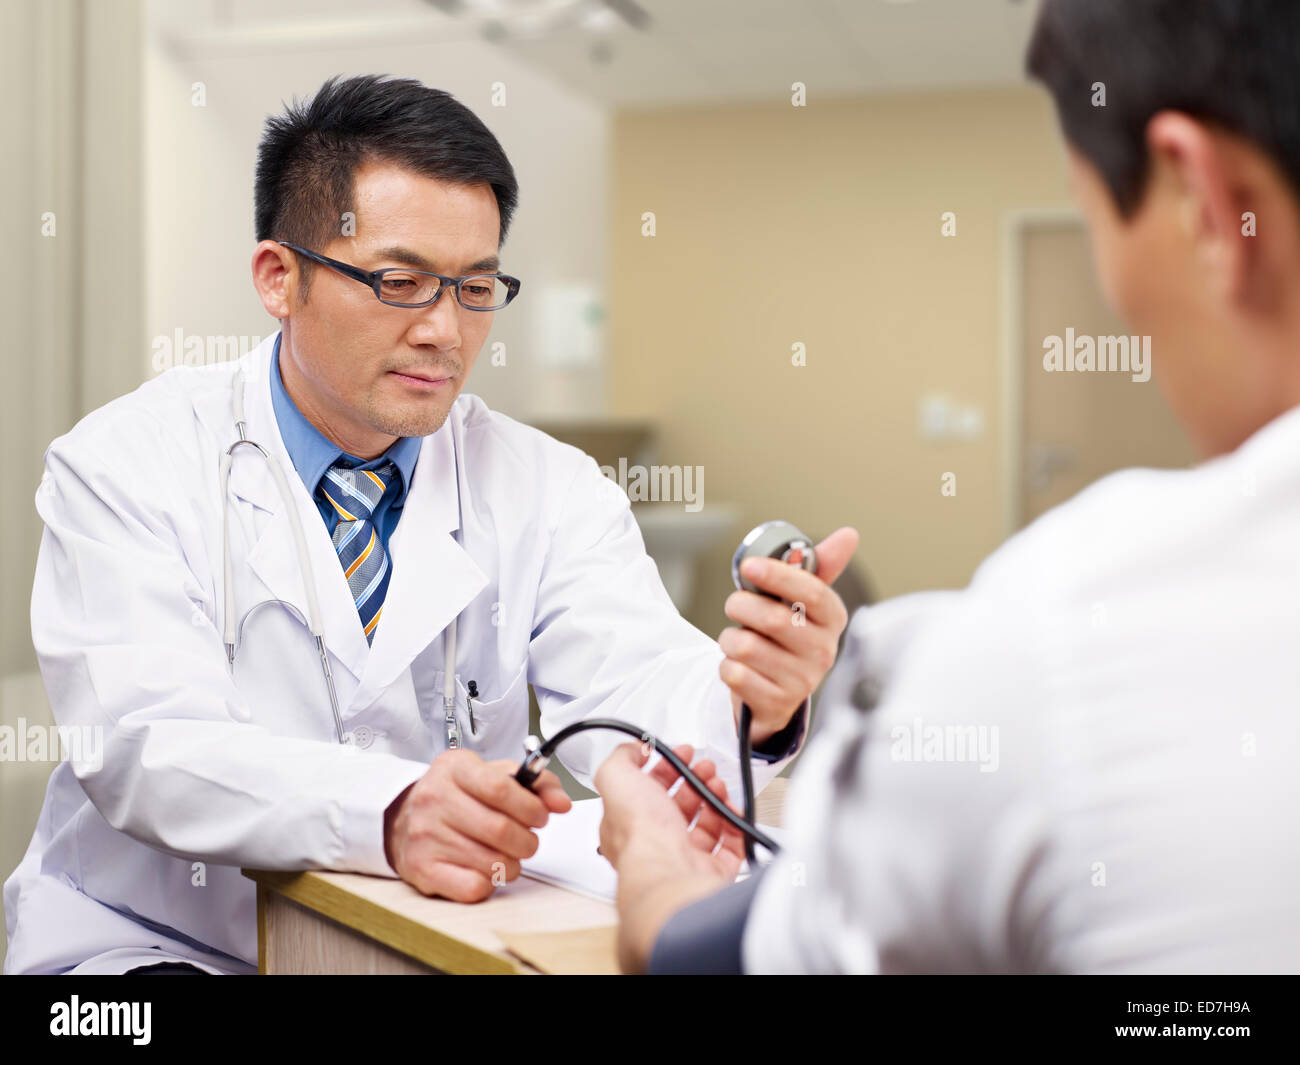 doctor and patient Stock Photo